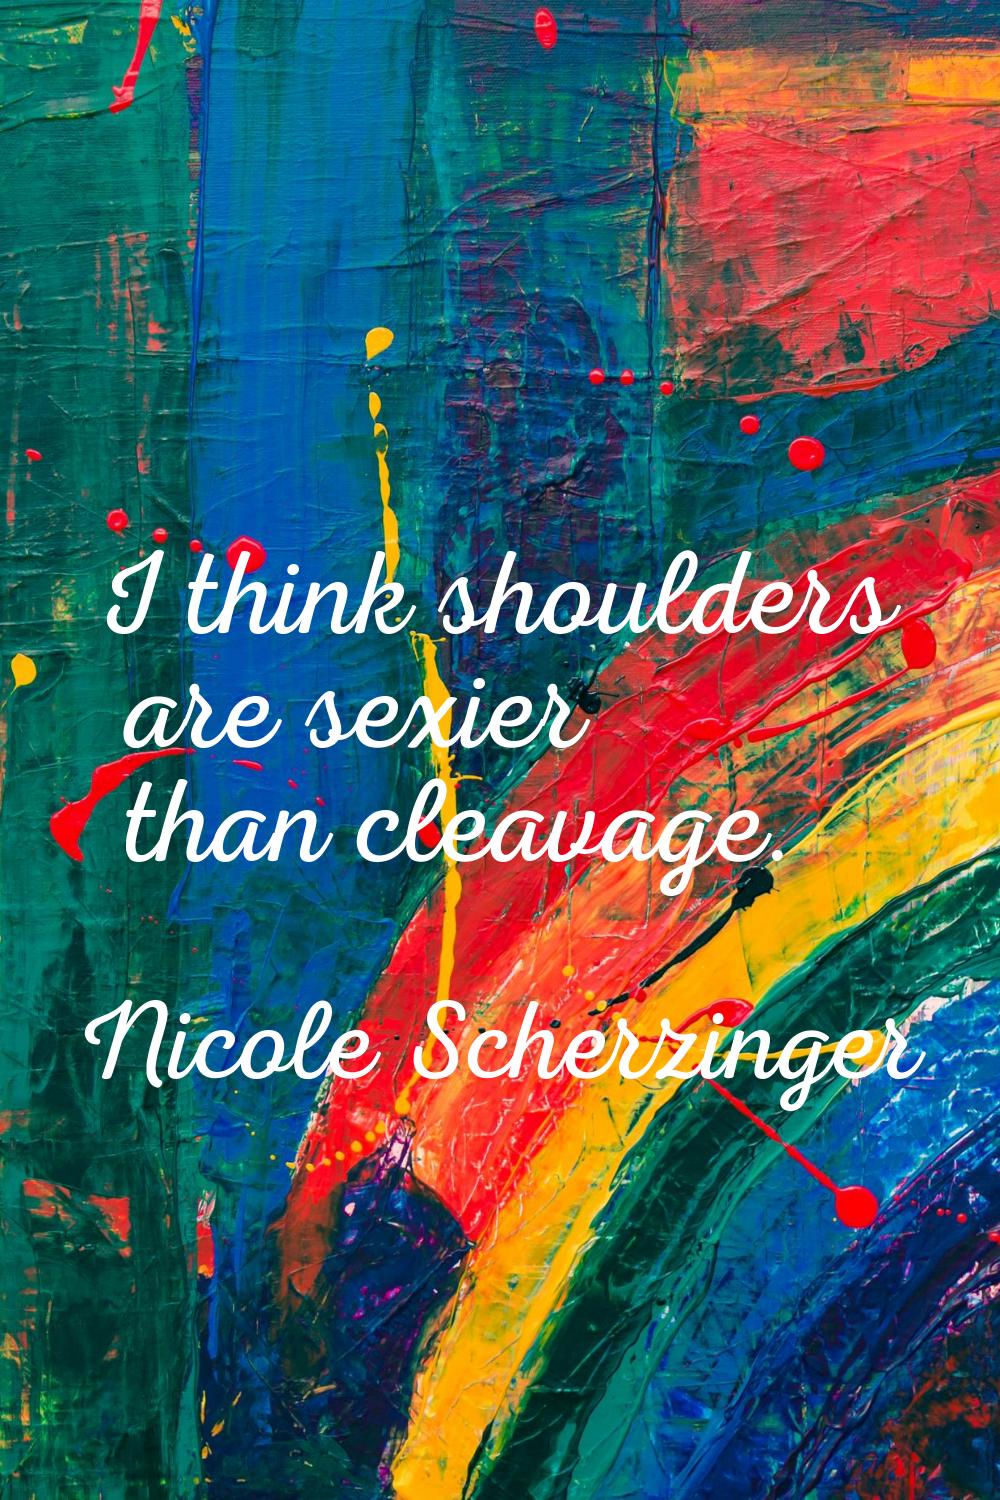 I think shoulders are sexier than cleavage.